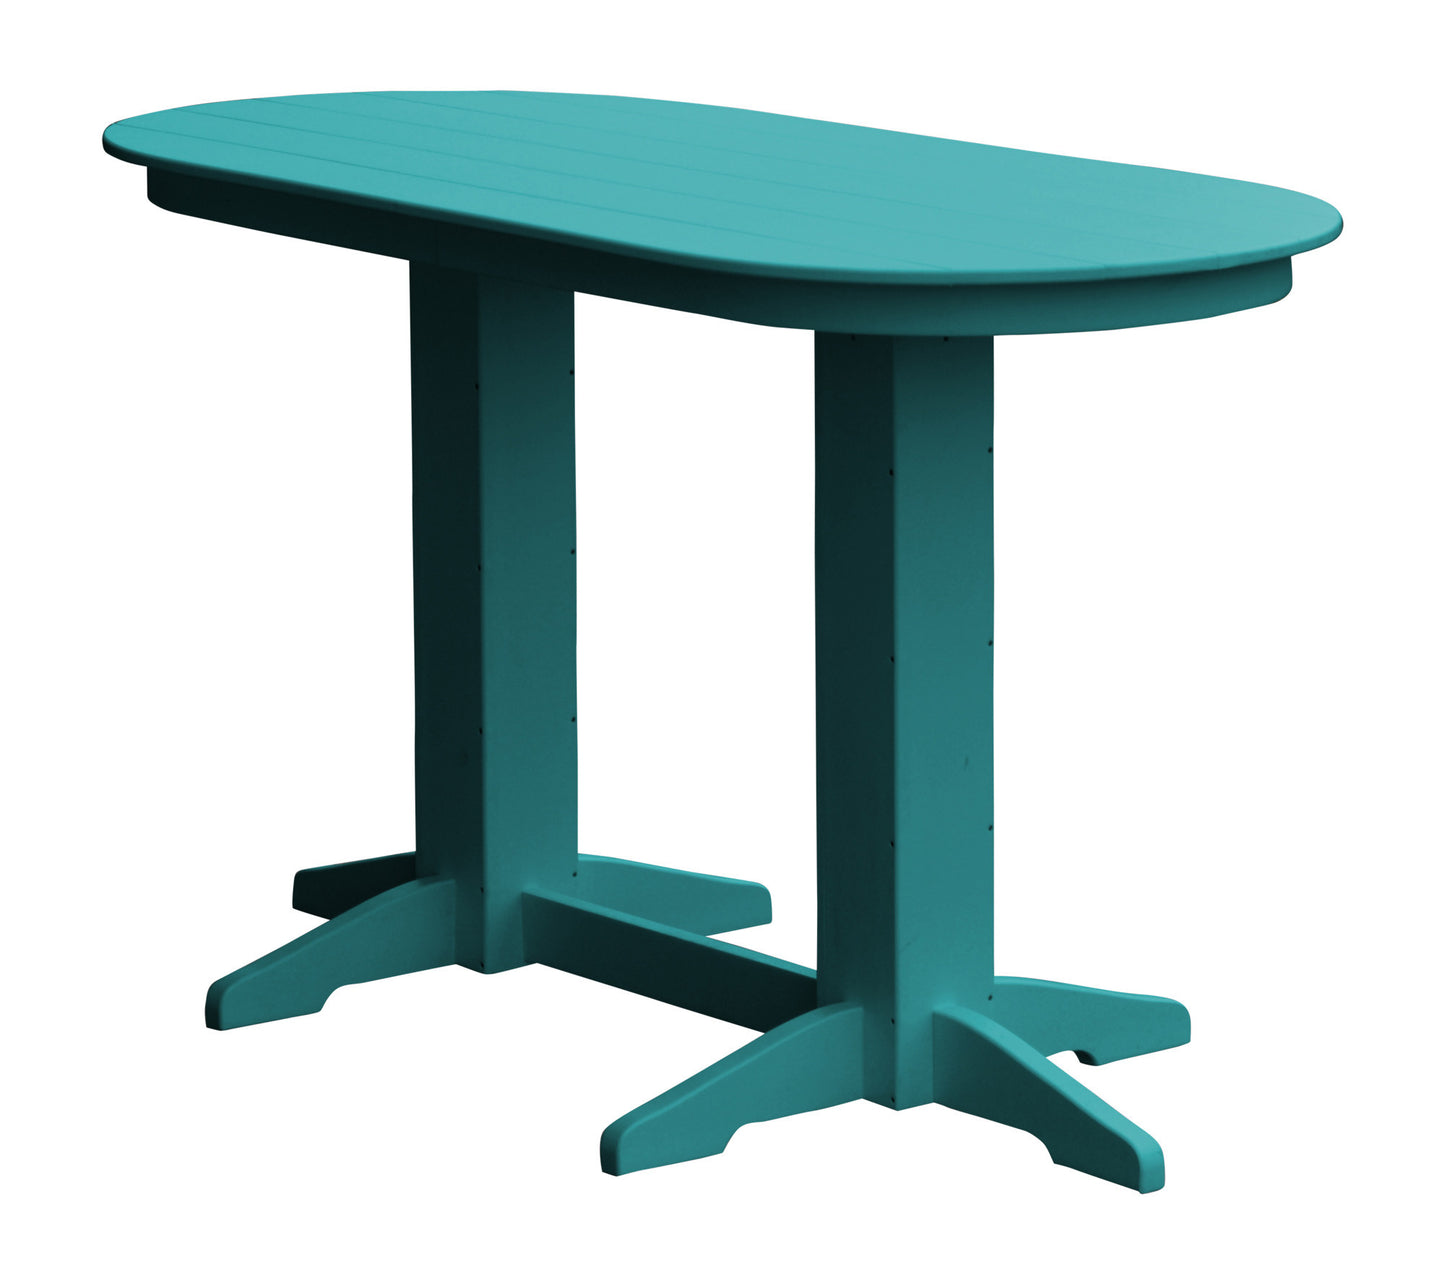 A&L Furniture Recycled Plastic 6' Oval Bar Table - Aruba Blue